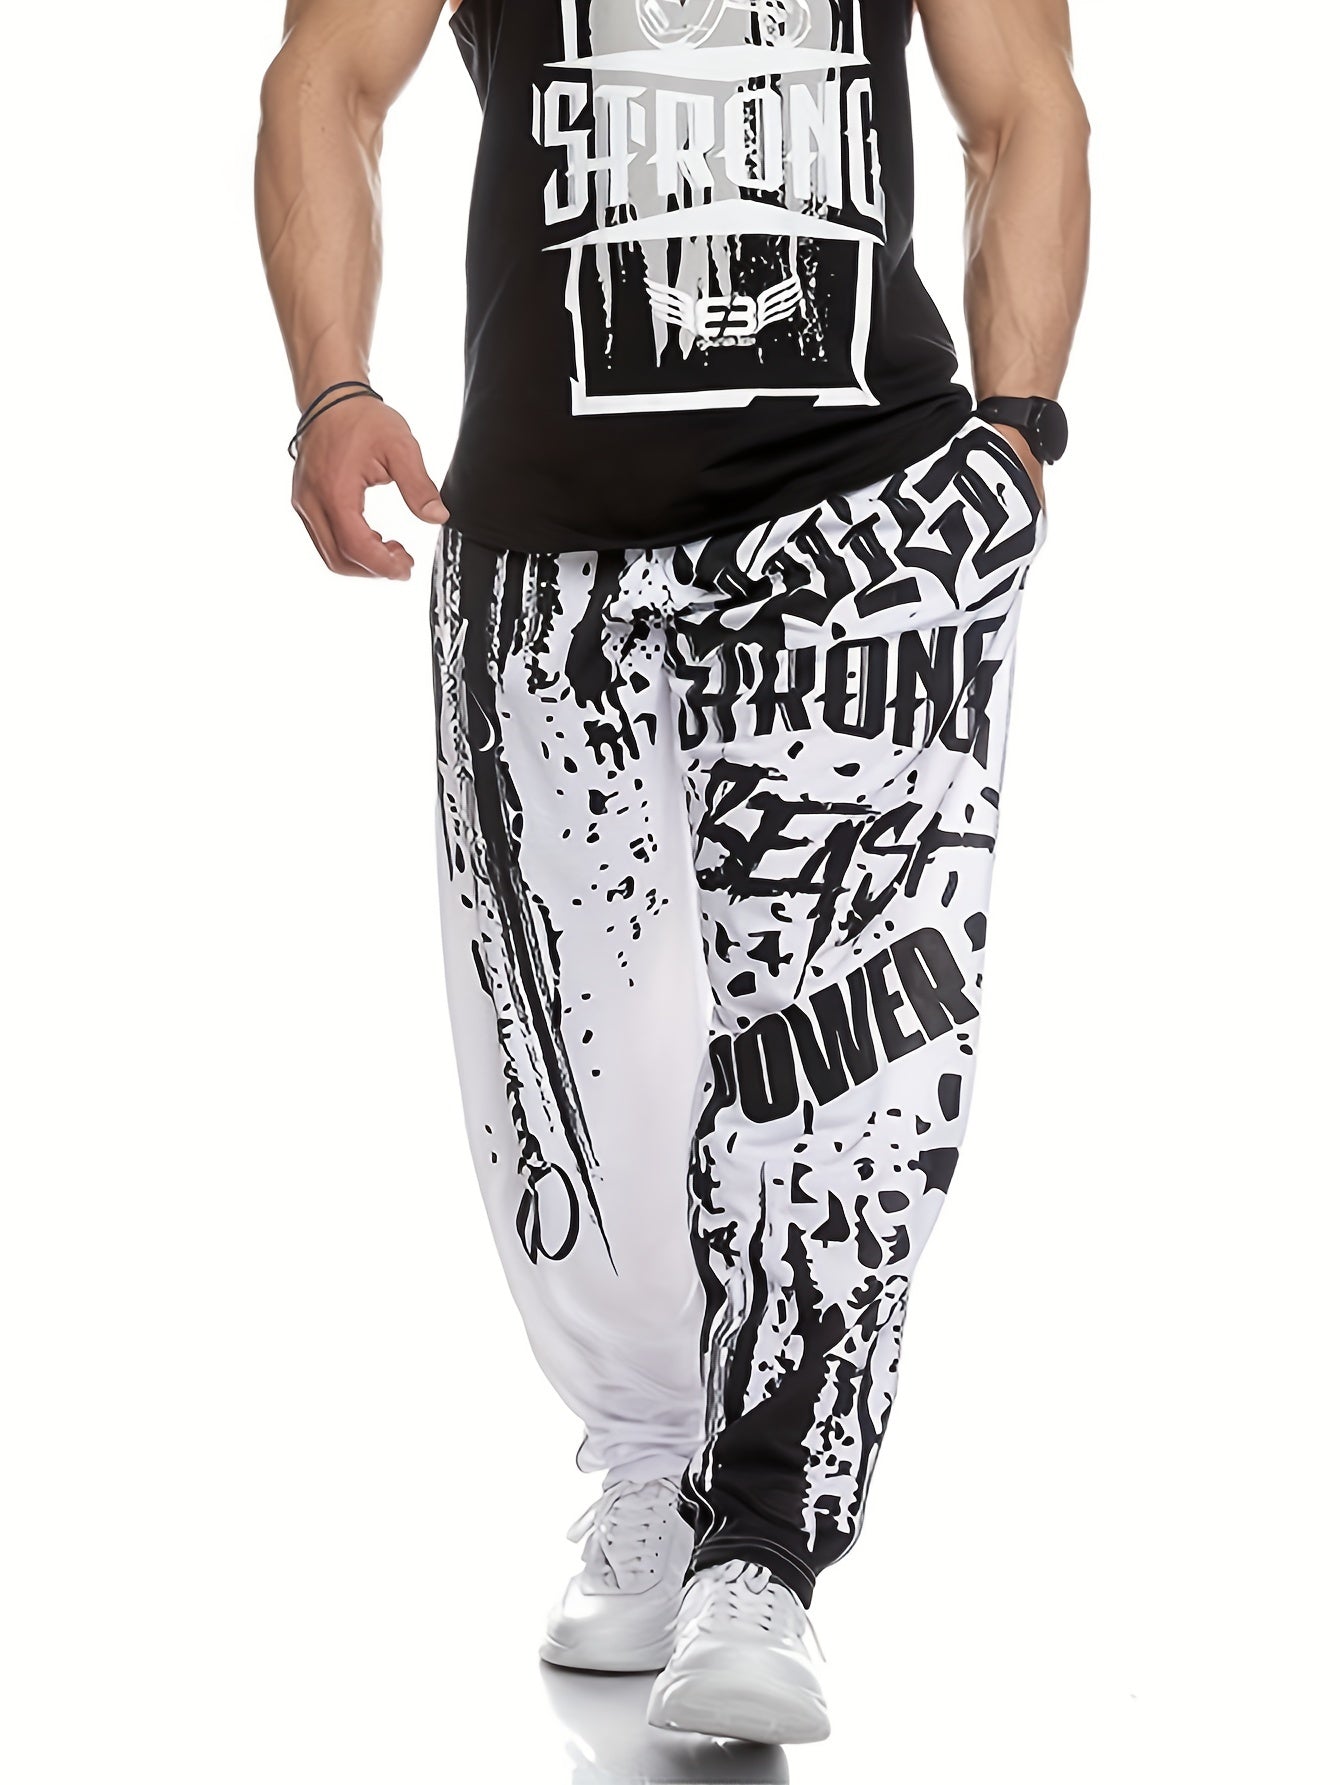 Trendy Loose Fit Printed Joggers, Men's Casual Street Style Stretch Sweatpants For Spring Fall